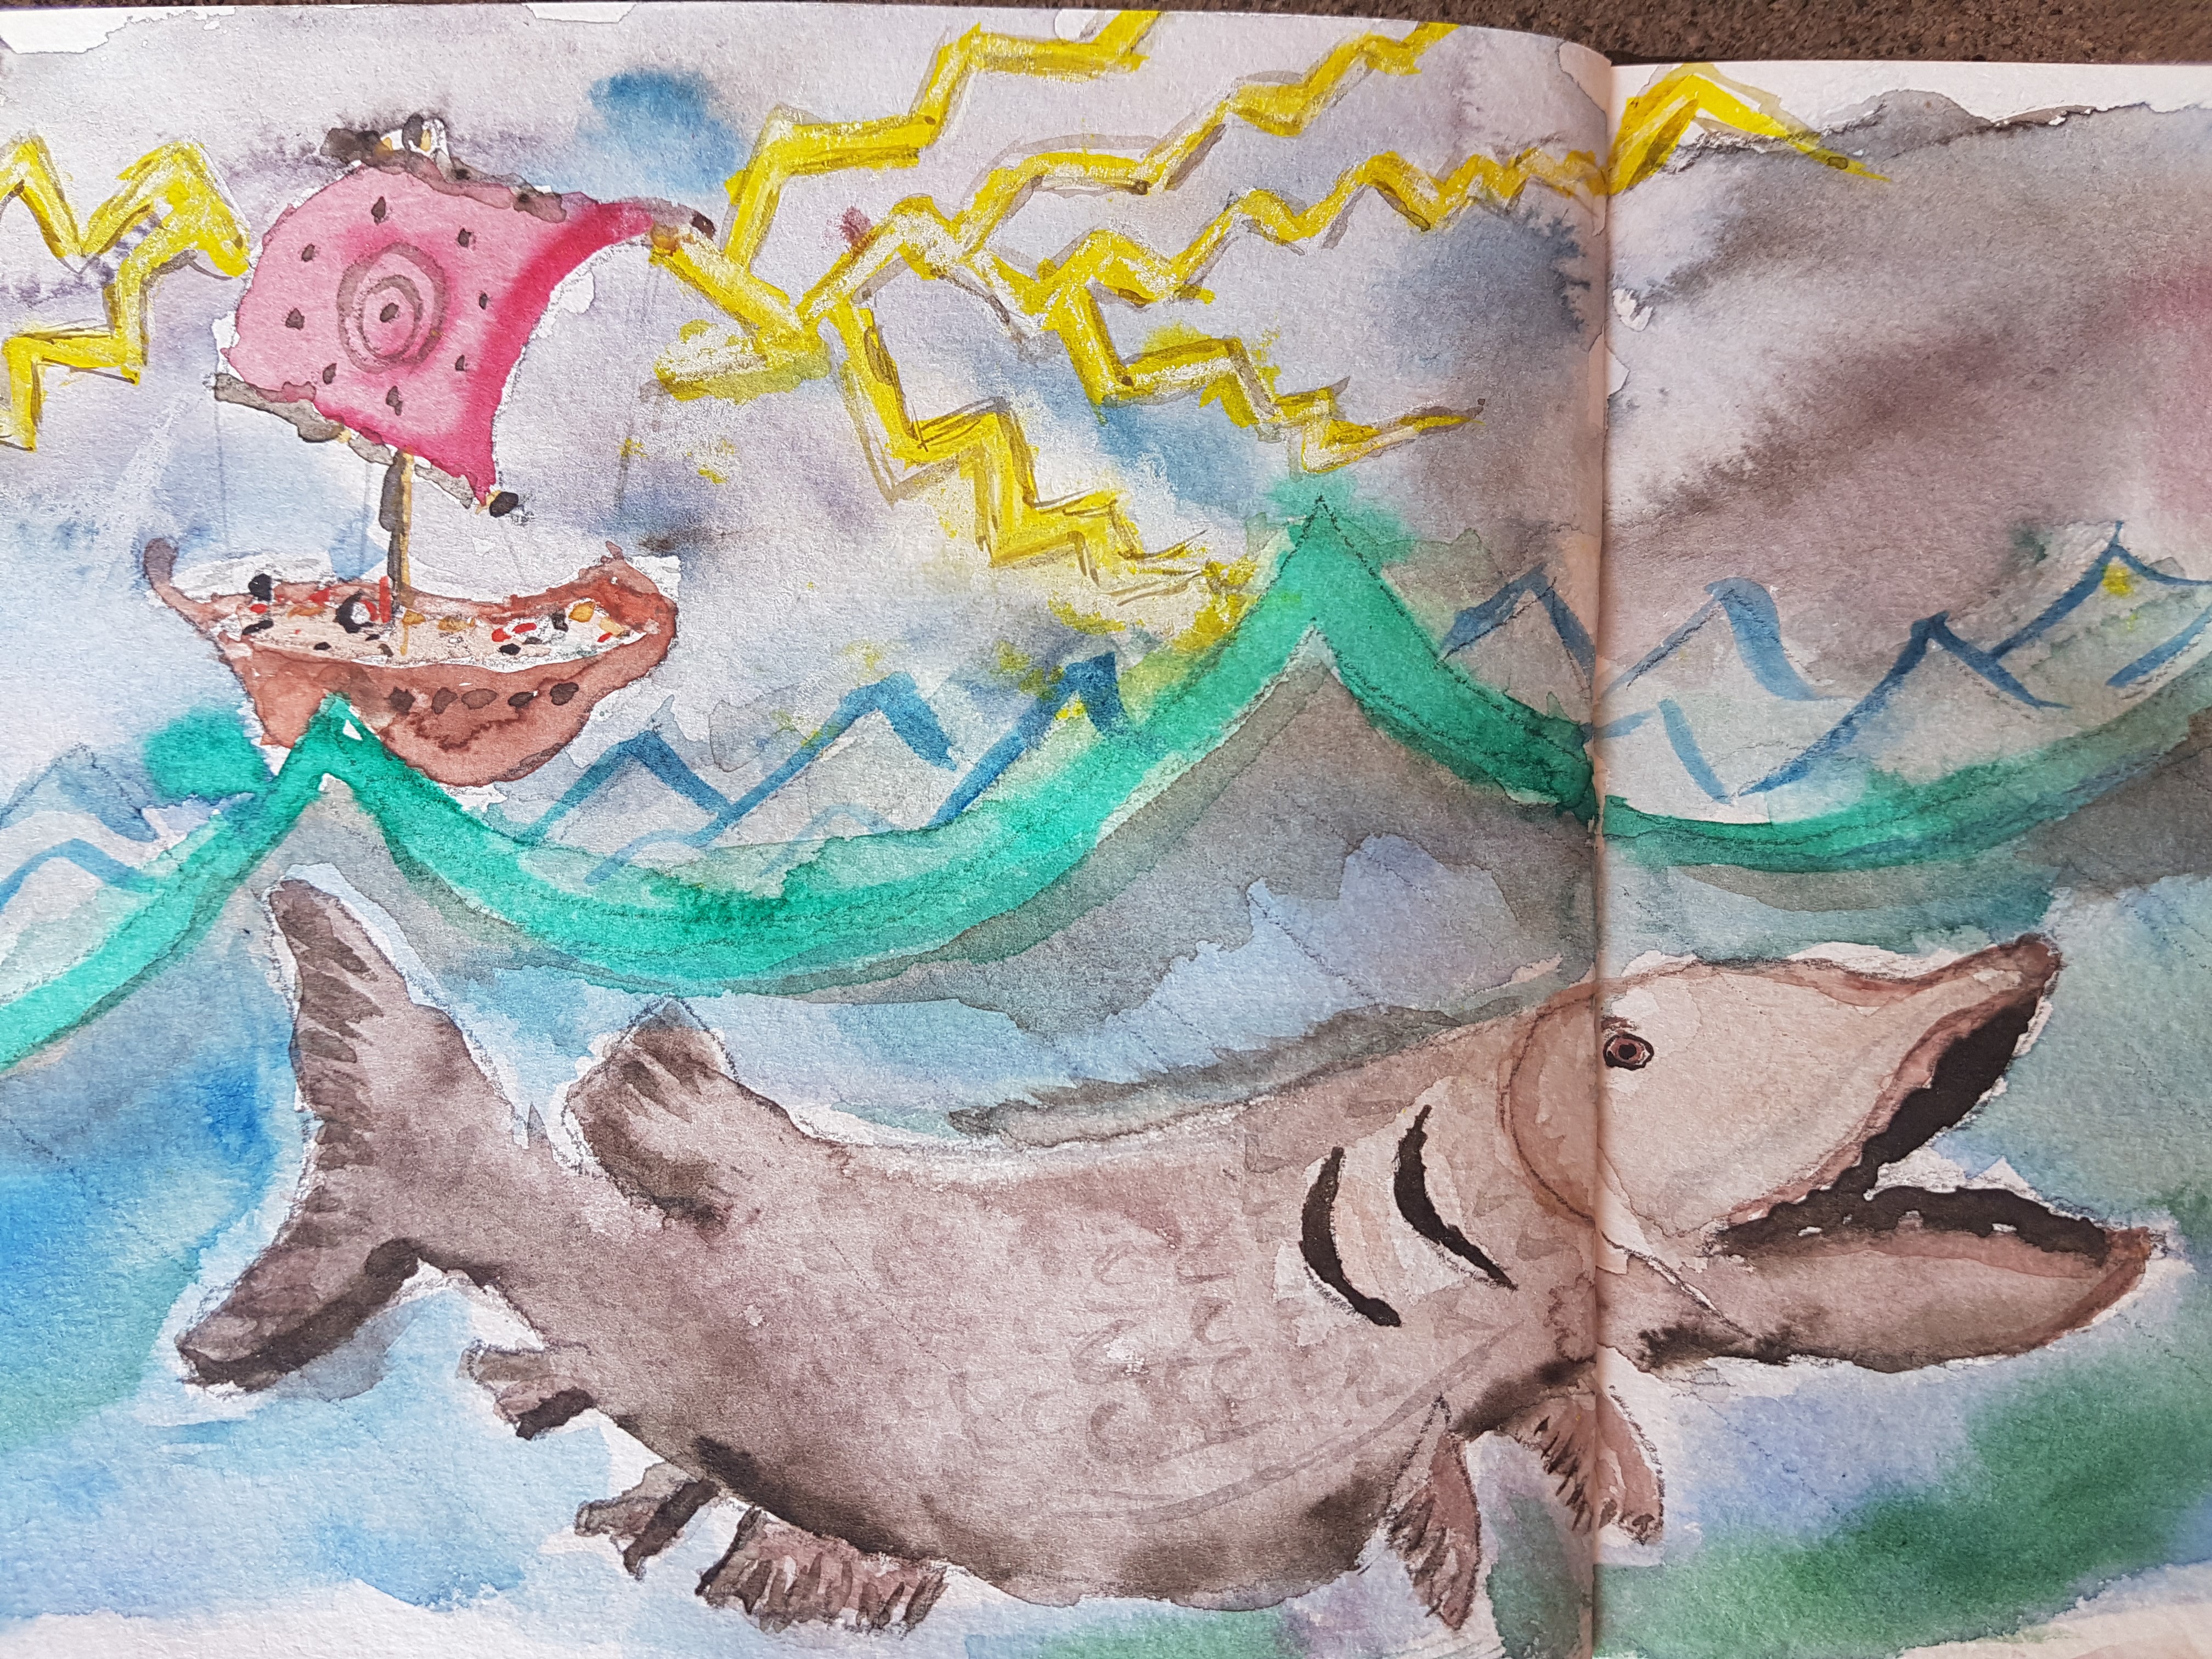 Sketchbook: The digestive chemicals in the belly of the fish could have killed Johah. How did he survive? The fish that swallowed Jonah, was it a plant-eating fish or was the large fish a carnivore? Credit: Author. April 2020.